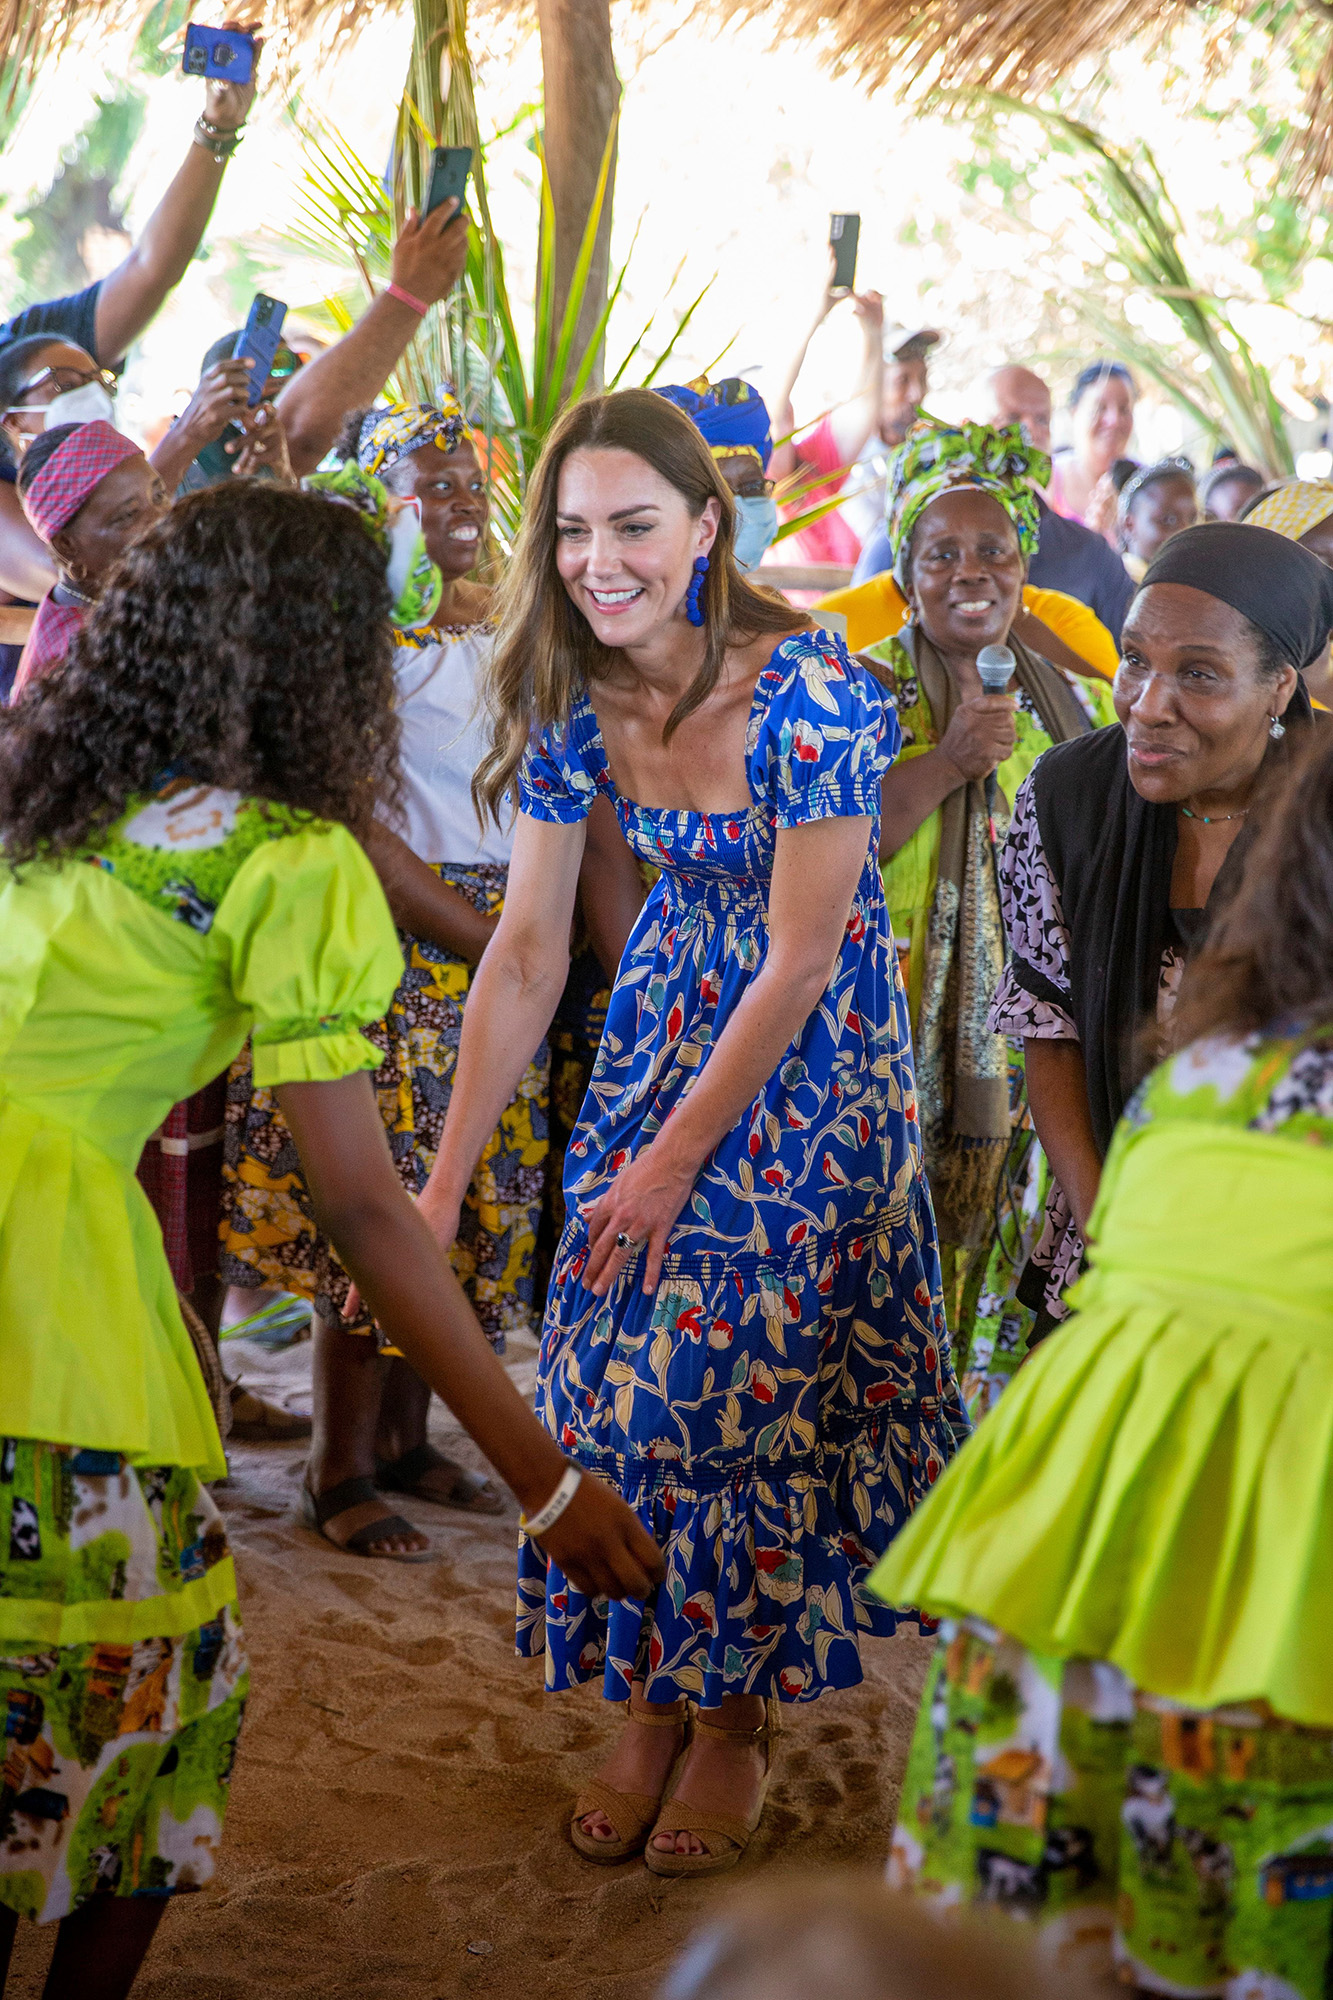 Prince William, Duchess Kate Dance in Belize Amid Royal Tour